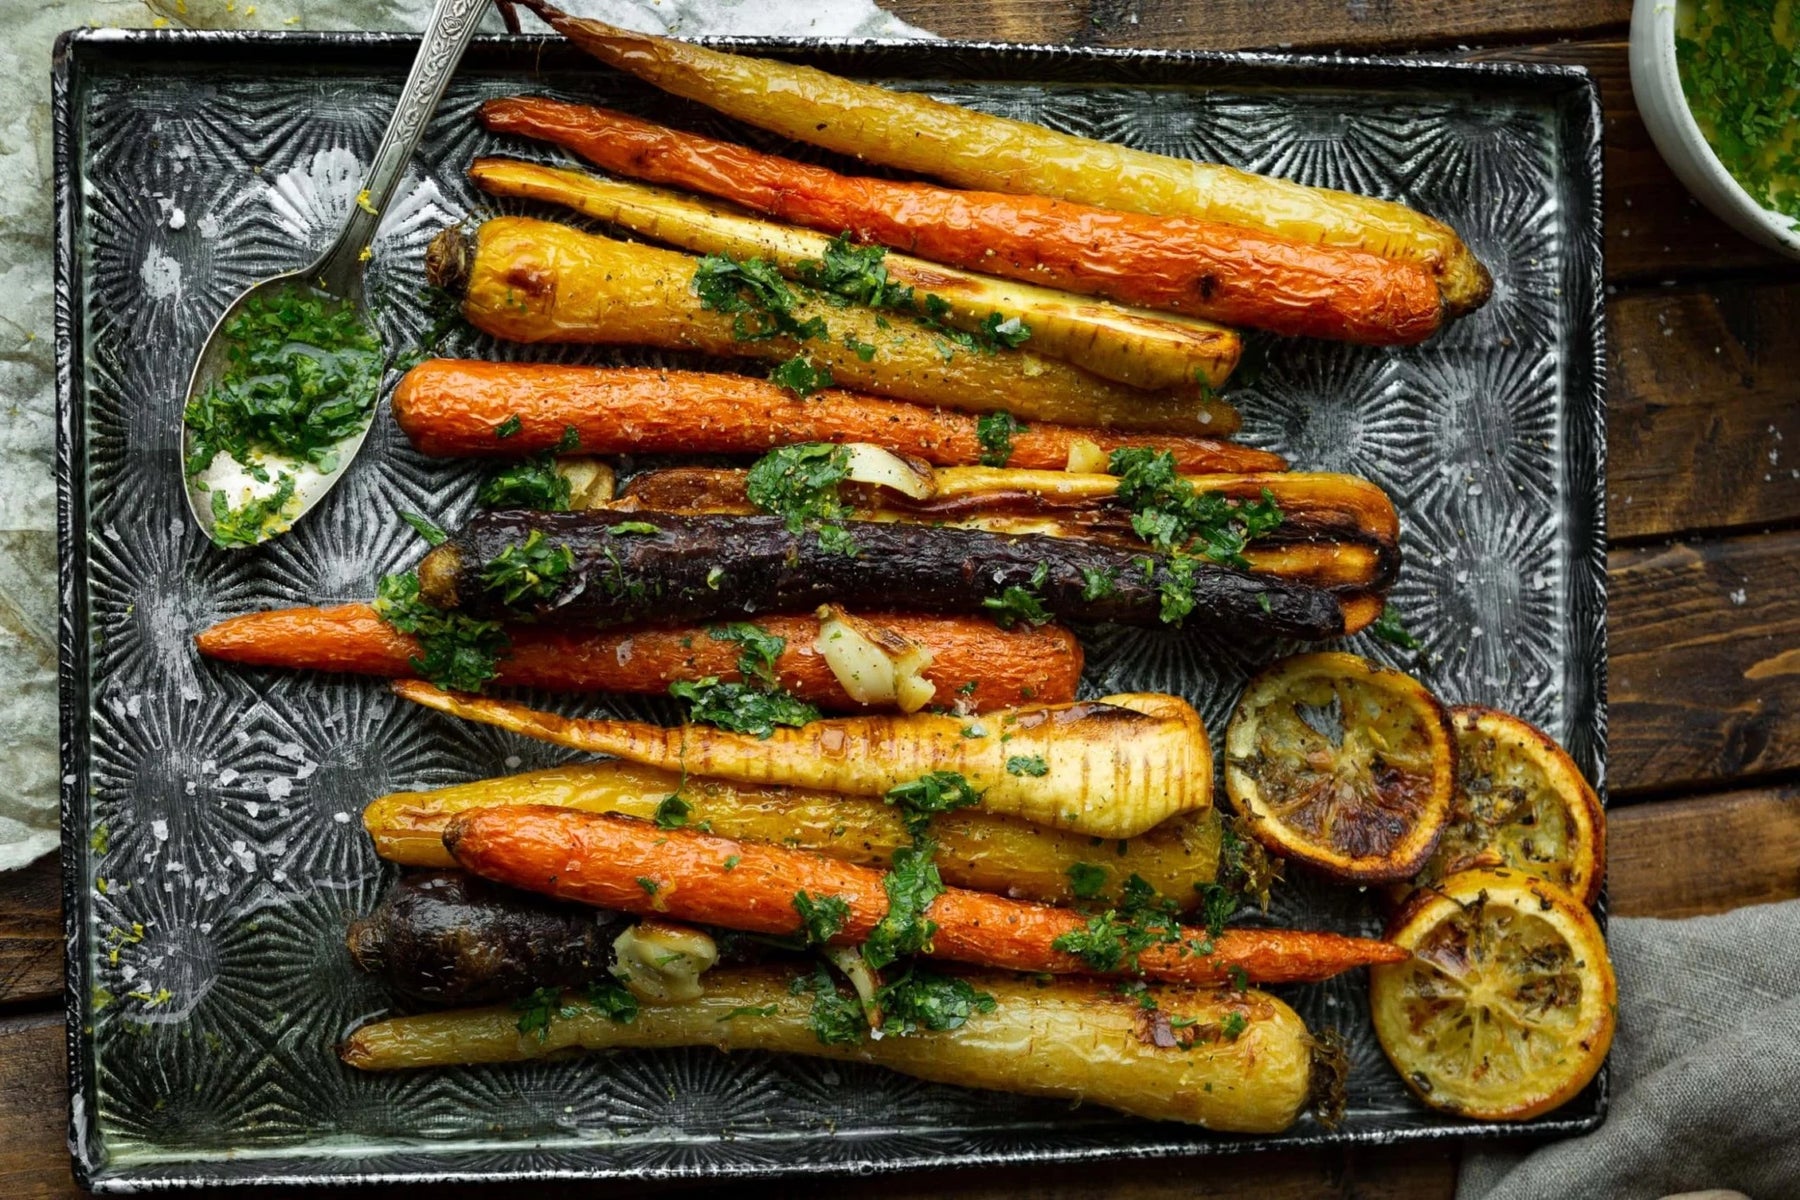 Lemon Roasted Carrots and Parsnips